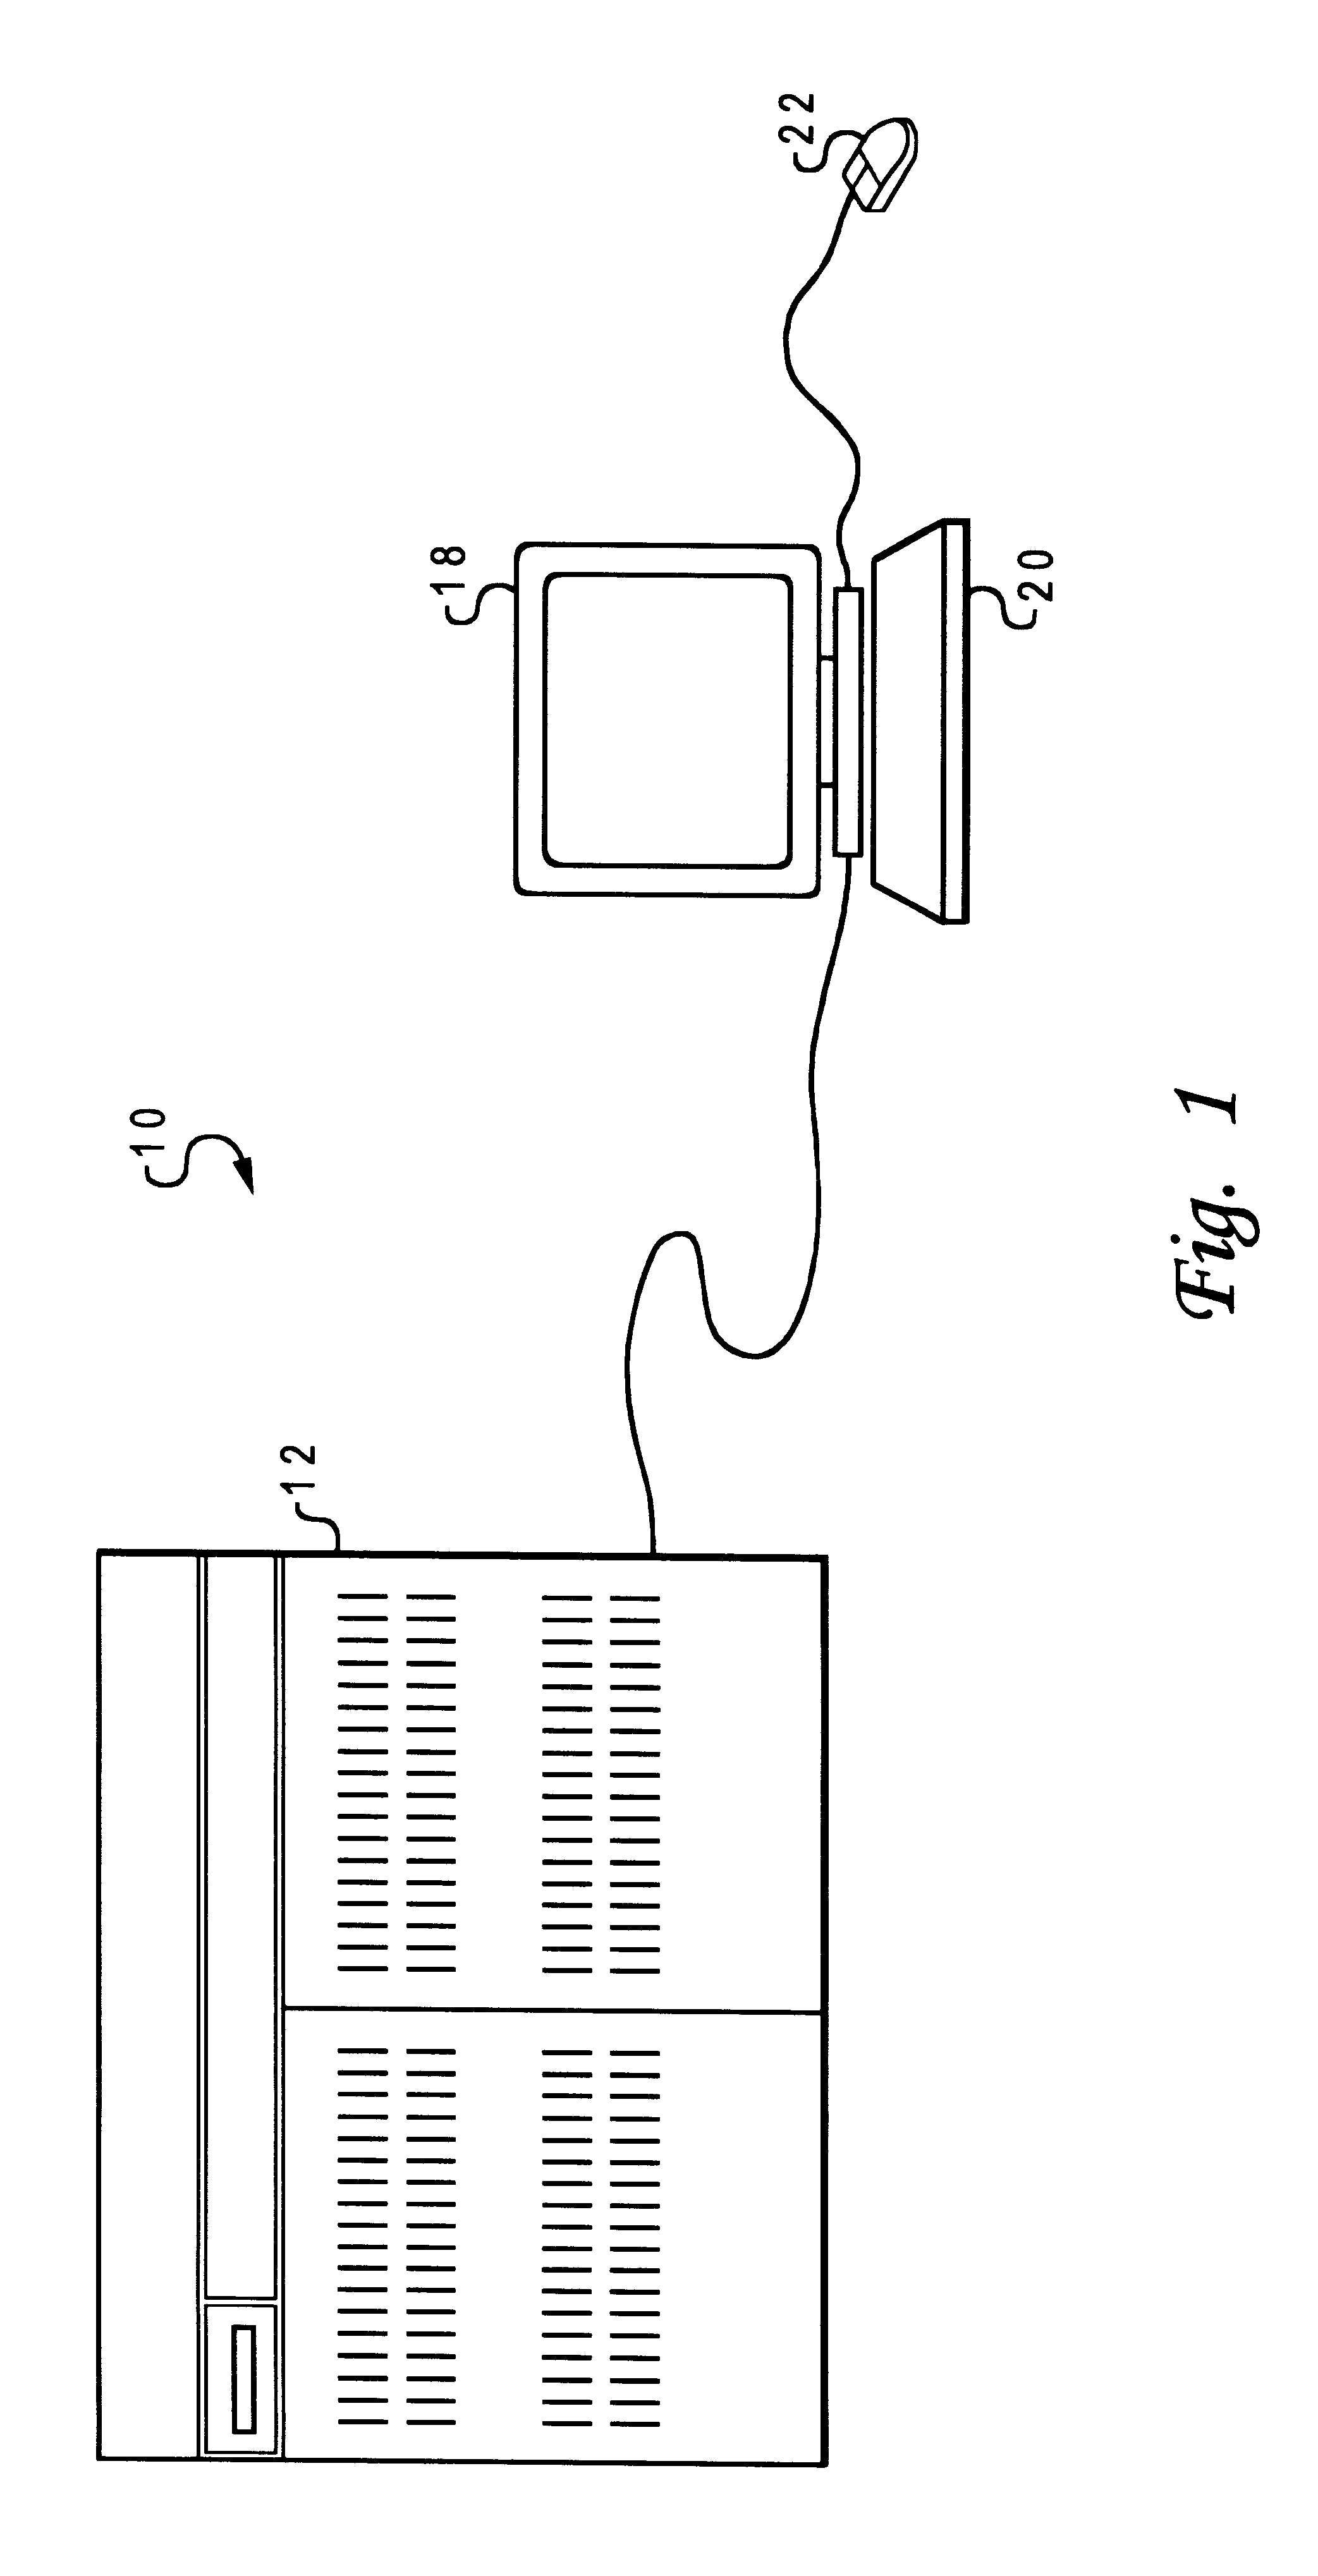 Method and system for software instruction level tracing in a data processing system